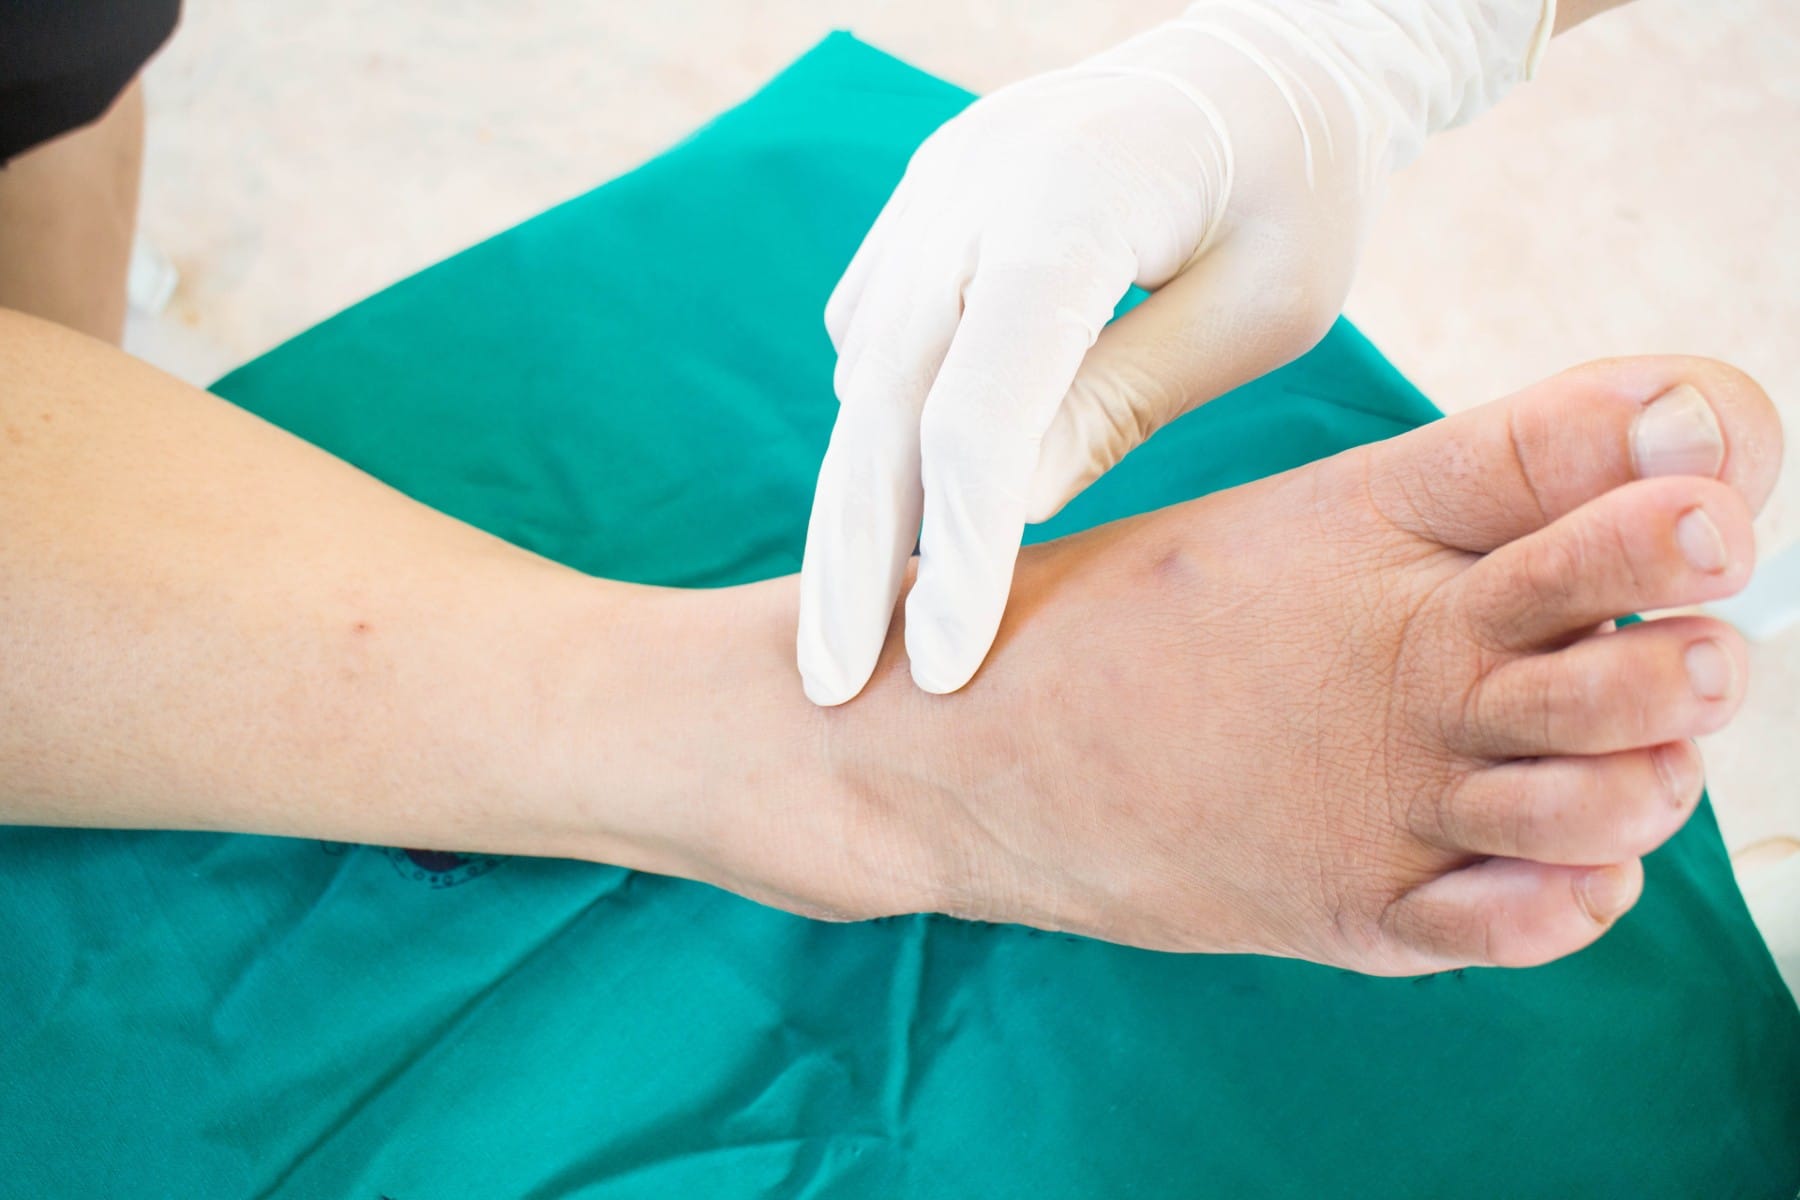 a doctor checking on a diabetic person's foot who may have charcot foot